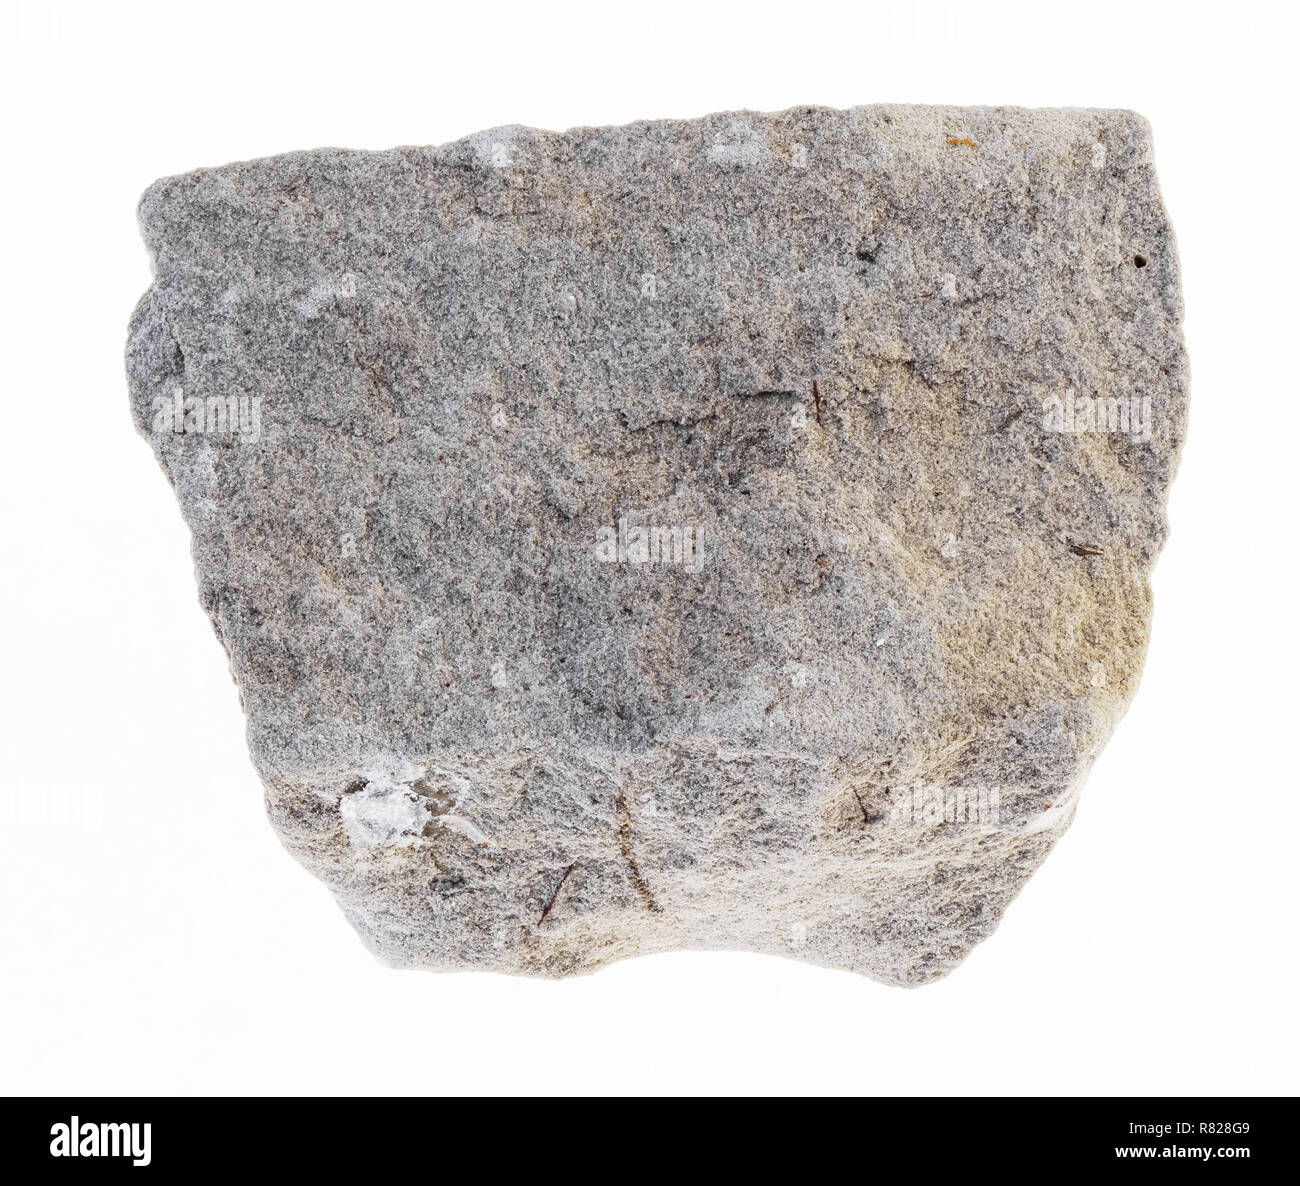 macro photography of natural mineral from geological collection - rough dolomite stone on white background Stock Photo